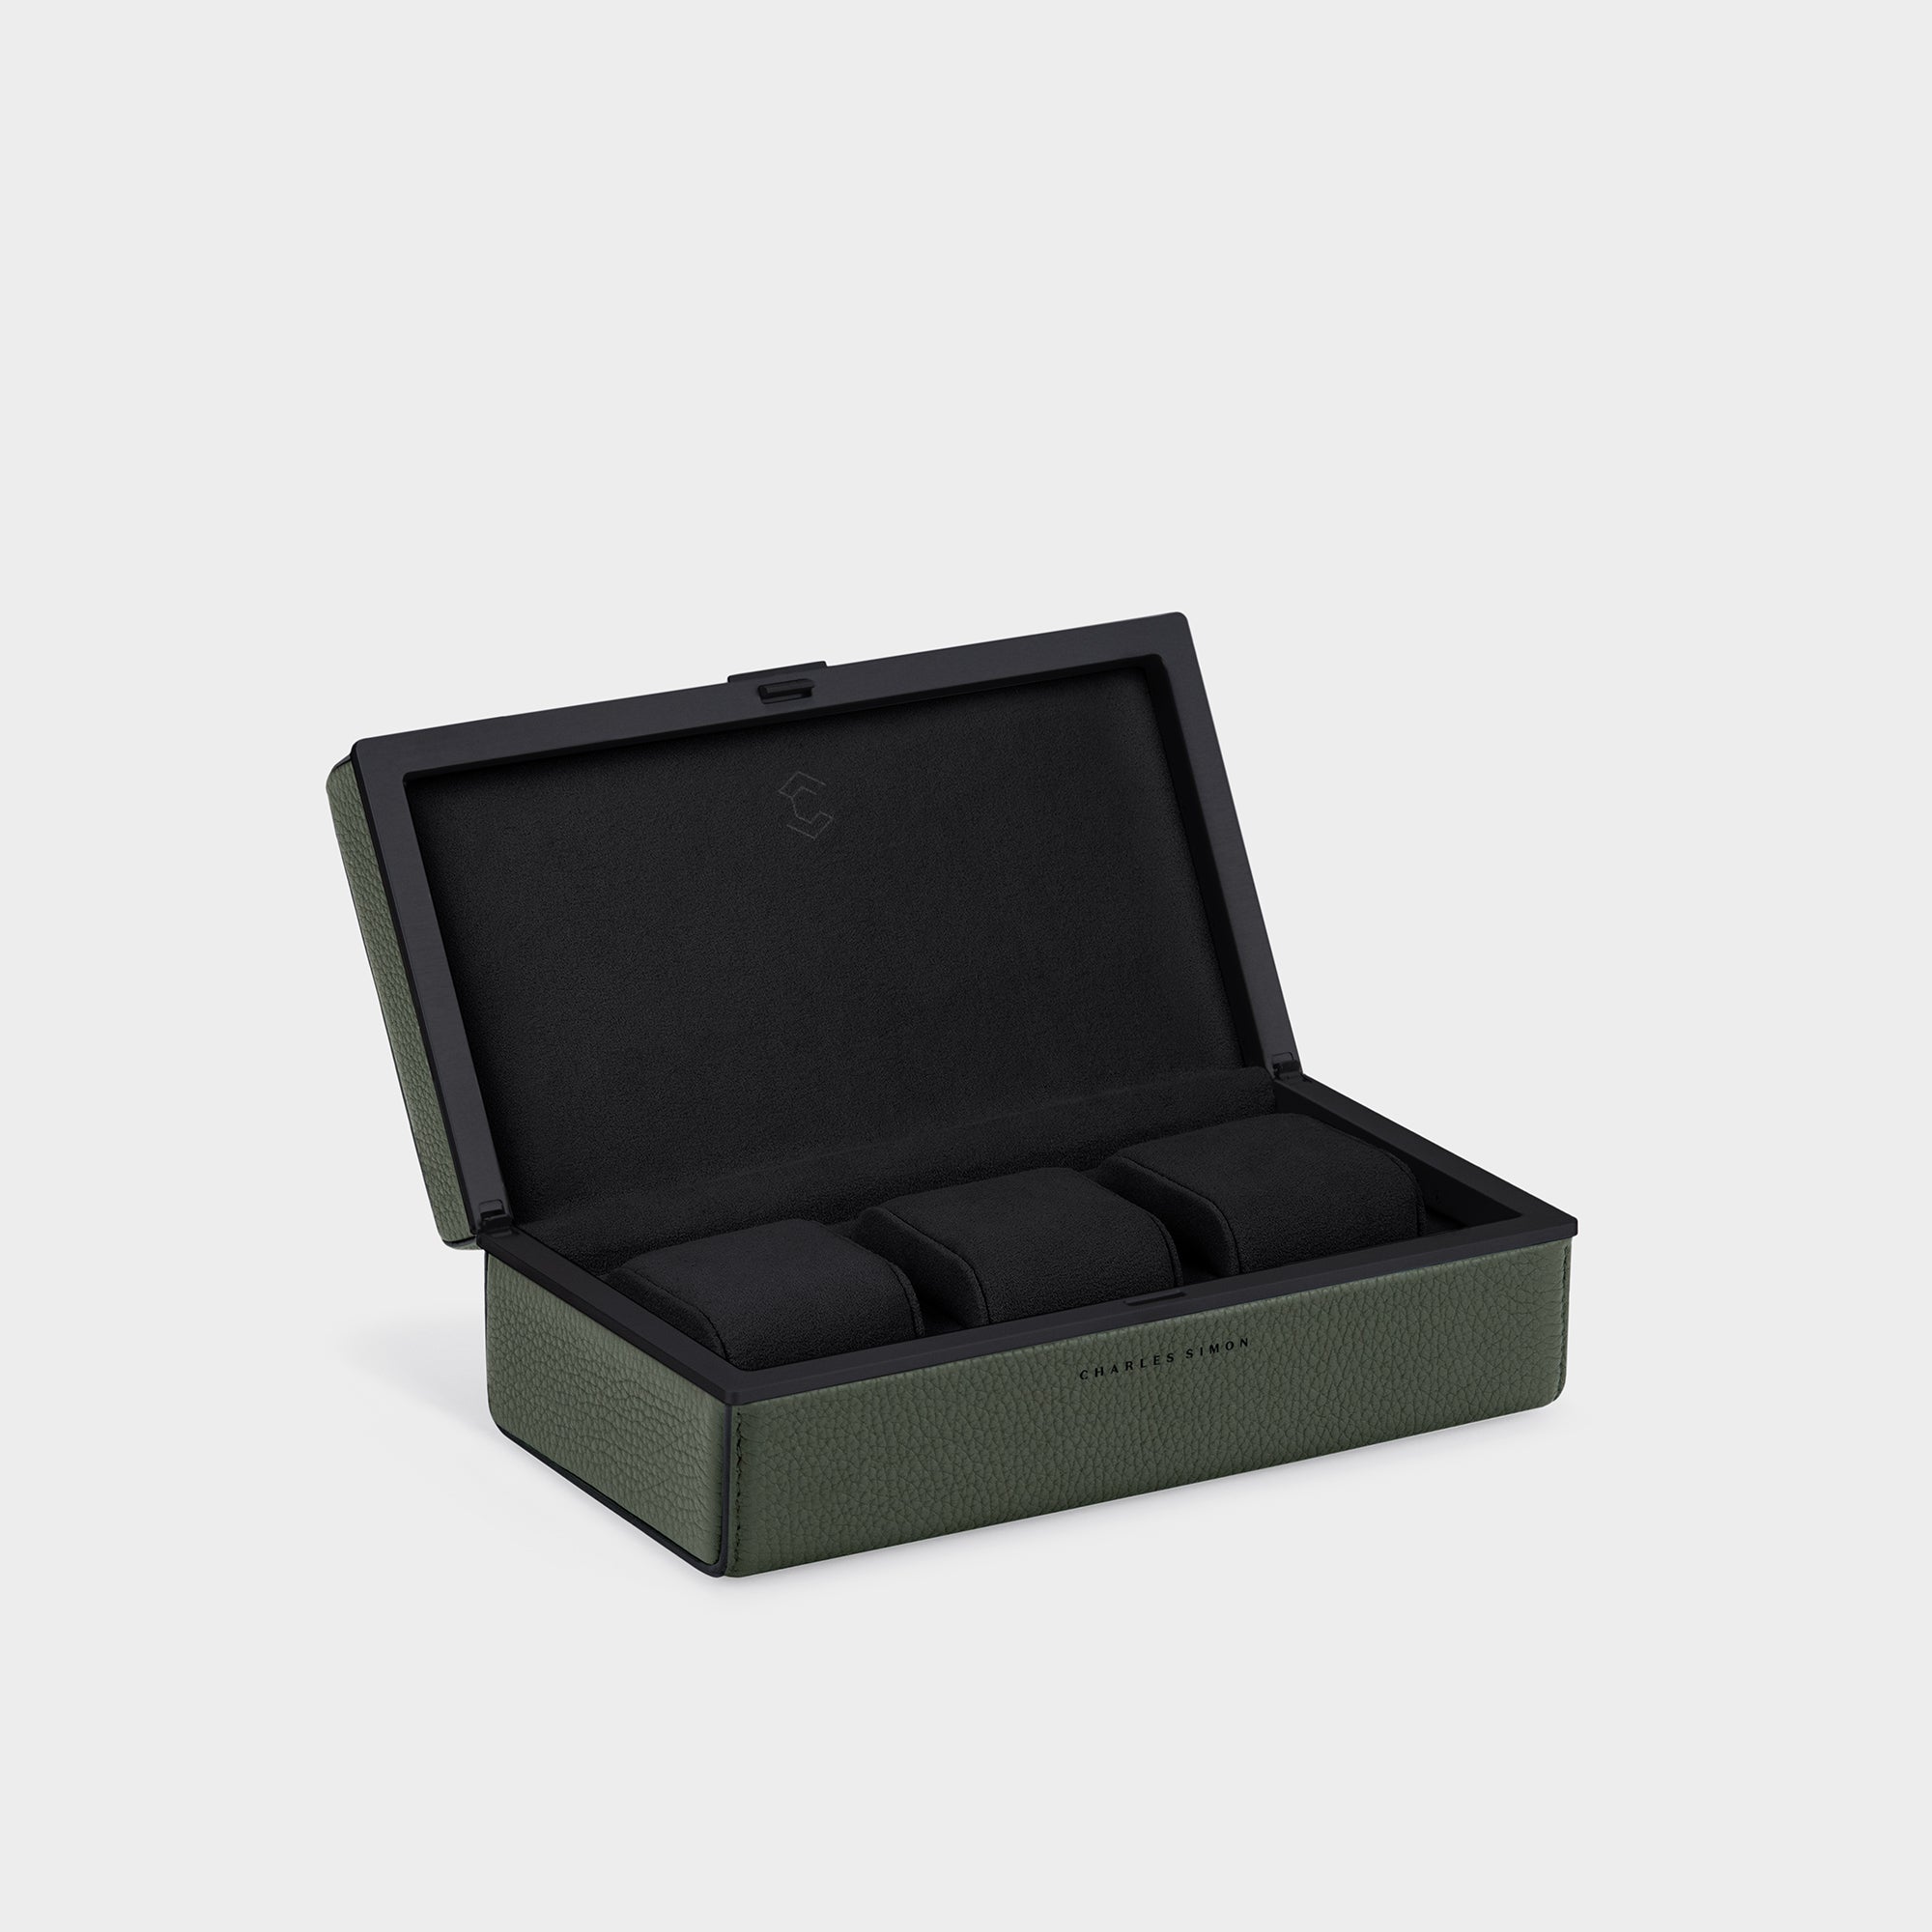 Luxury watch case for up to 3 watches. Handmade in Canada from premium khaki French leather with black contrasting edges, Notte black Alcantara and black anodized aluminum.